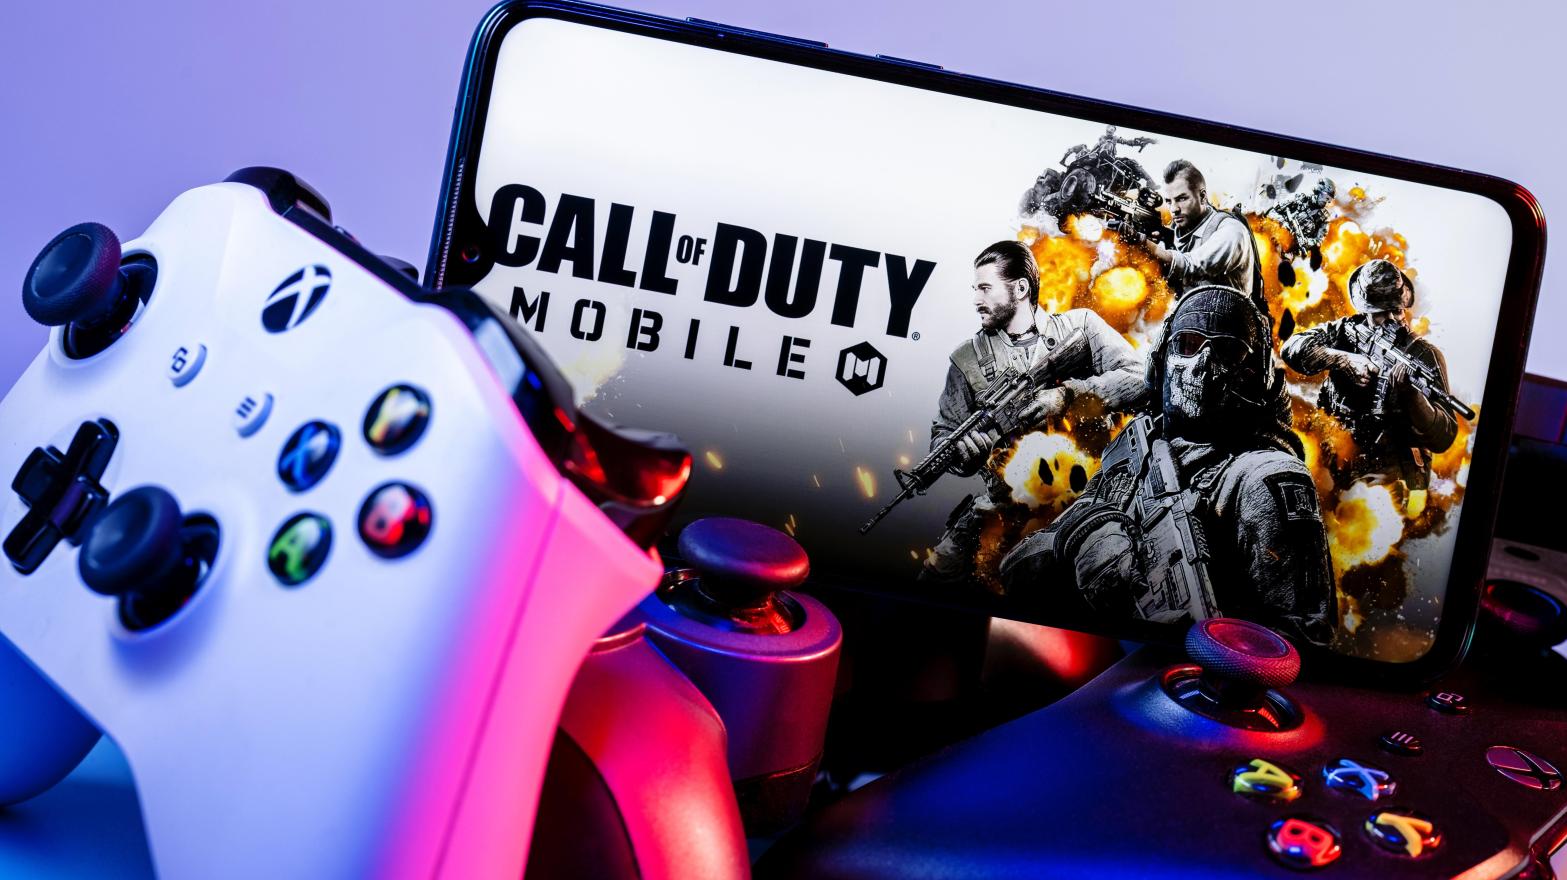 Microsoft cited Call of Duty Mobile specifically for how creating a mobile gaming store would be beneficial to both the company and users. (Photo: Sergei Elagin, Shutterstock)